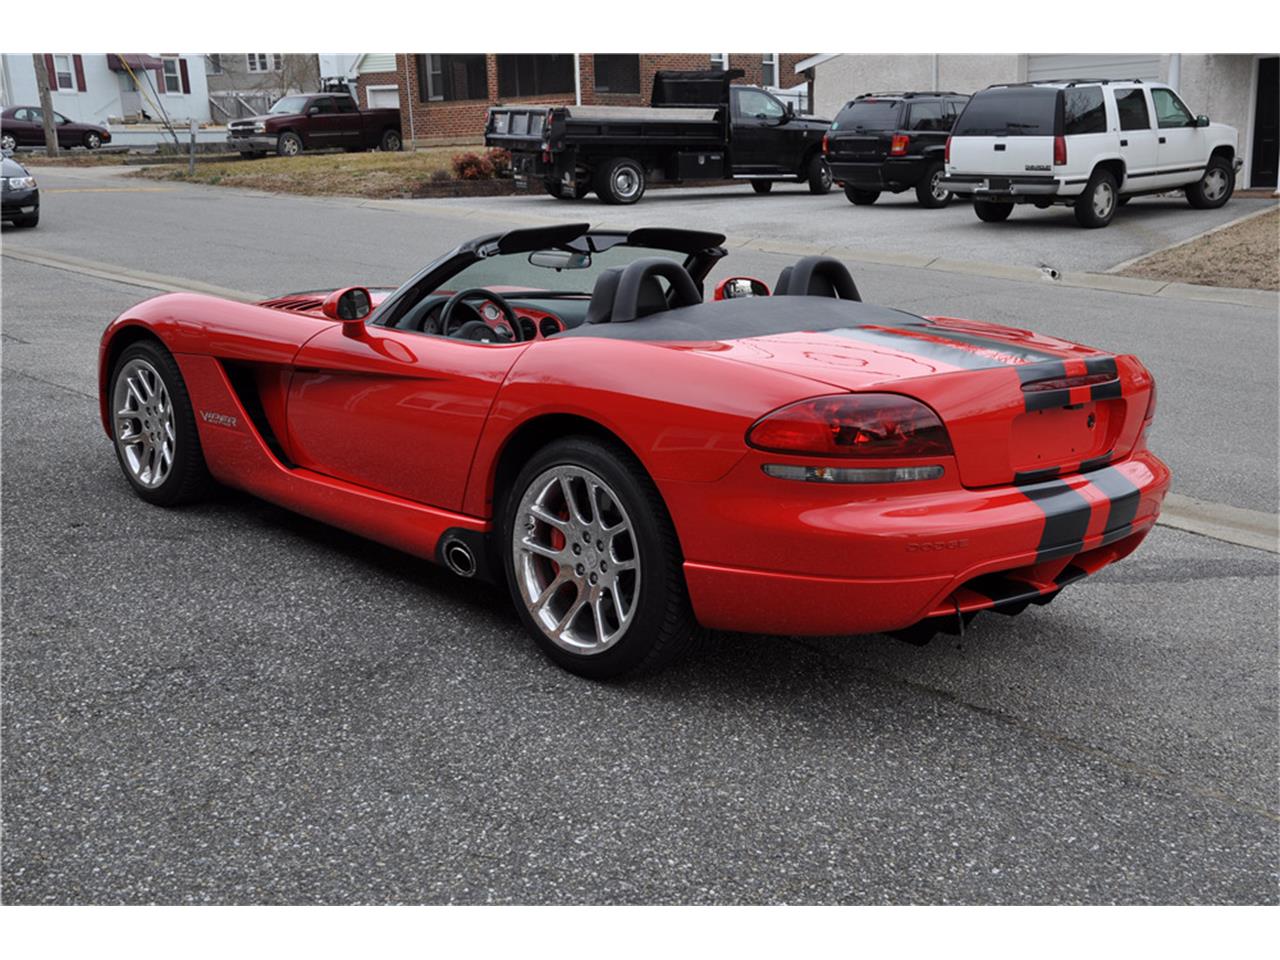 For Sale at Auction: 2004 Dodge Viper for sale in West Palm Beach, FL